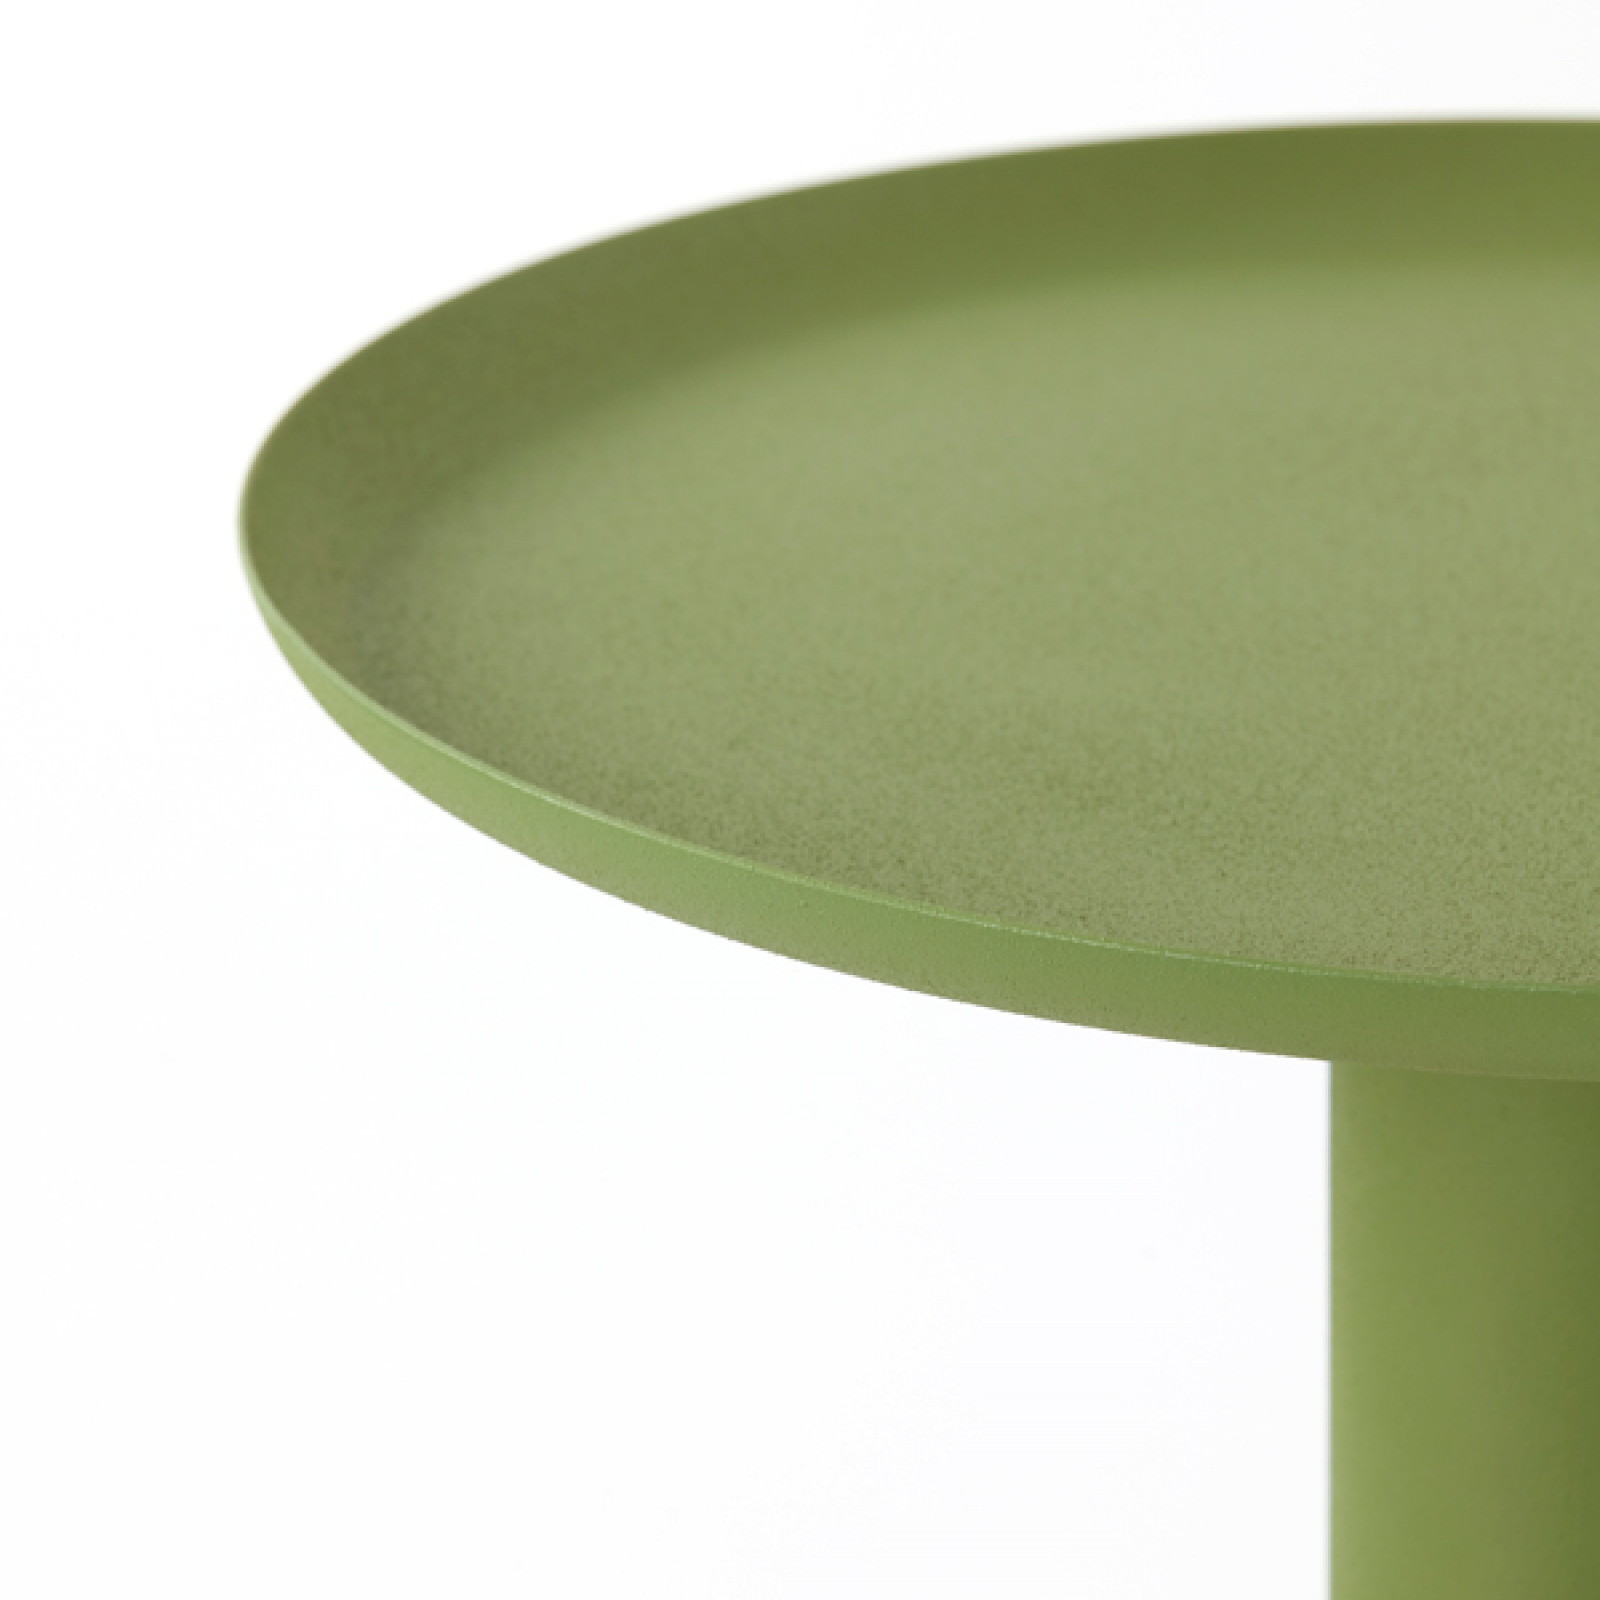 Milaki green side table